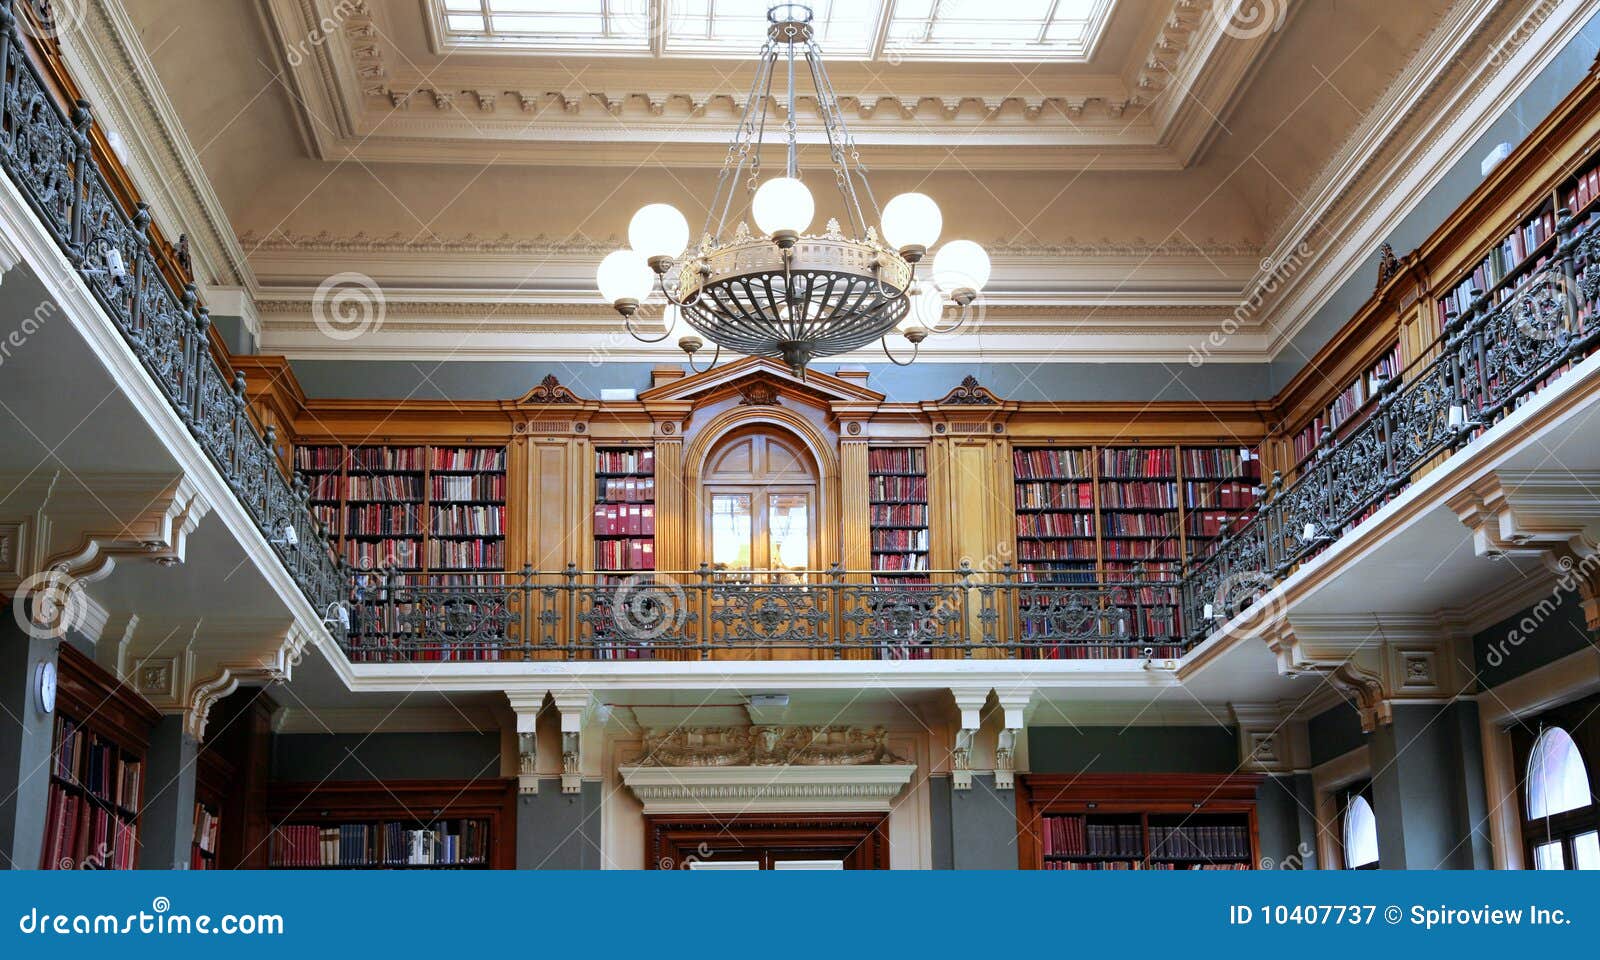 Bookshelves in old library stock image. Image of balcony ...